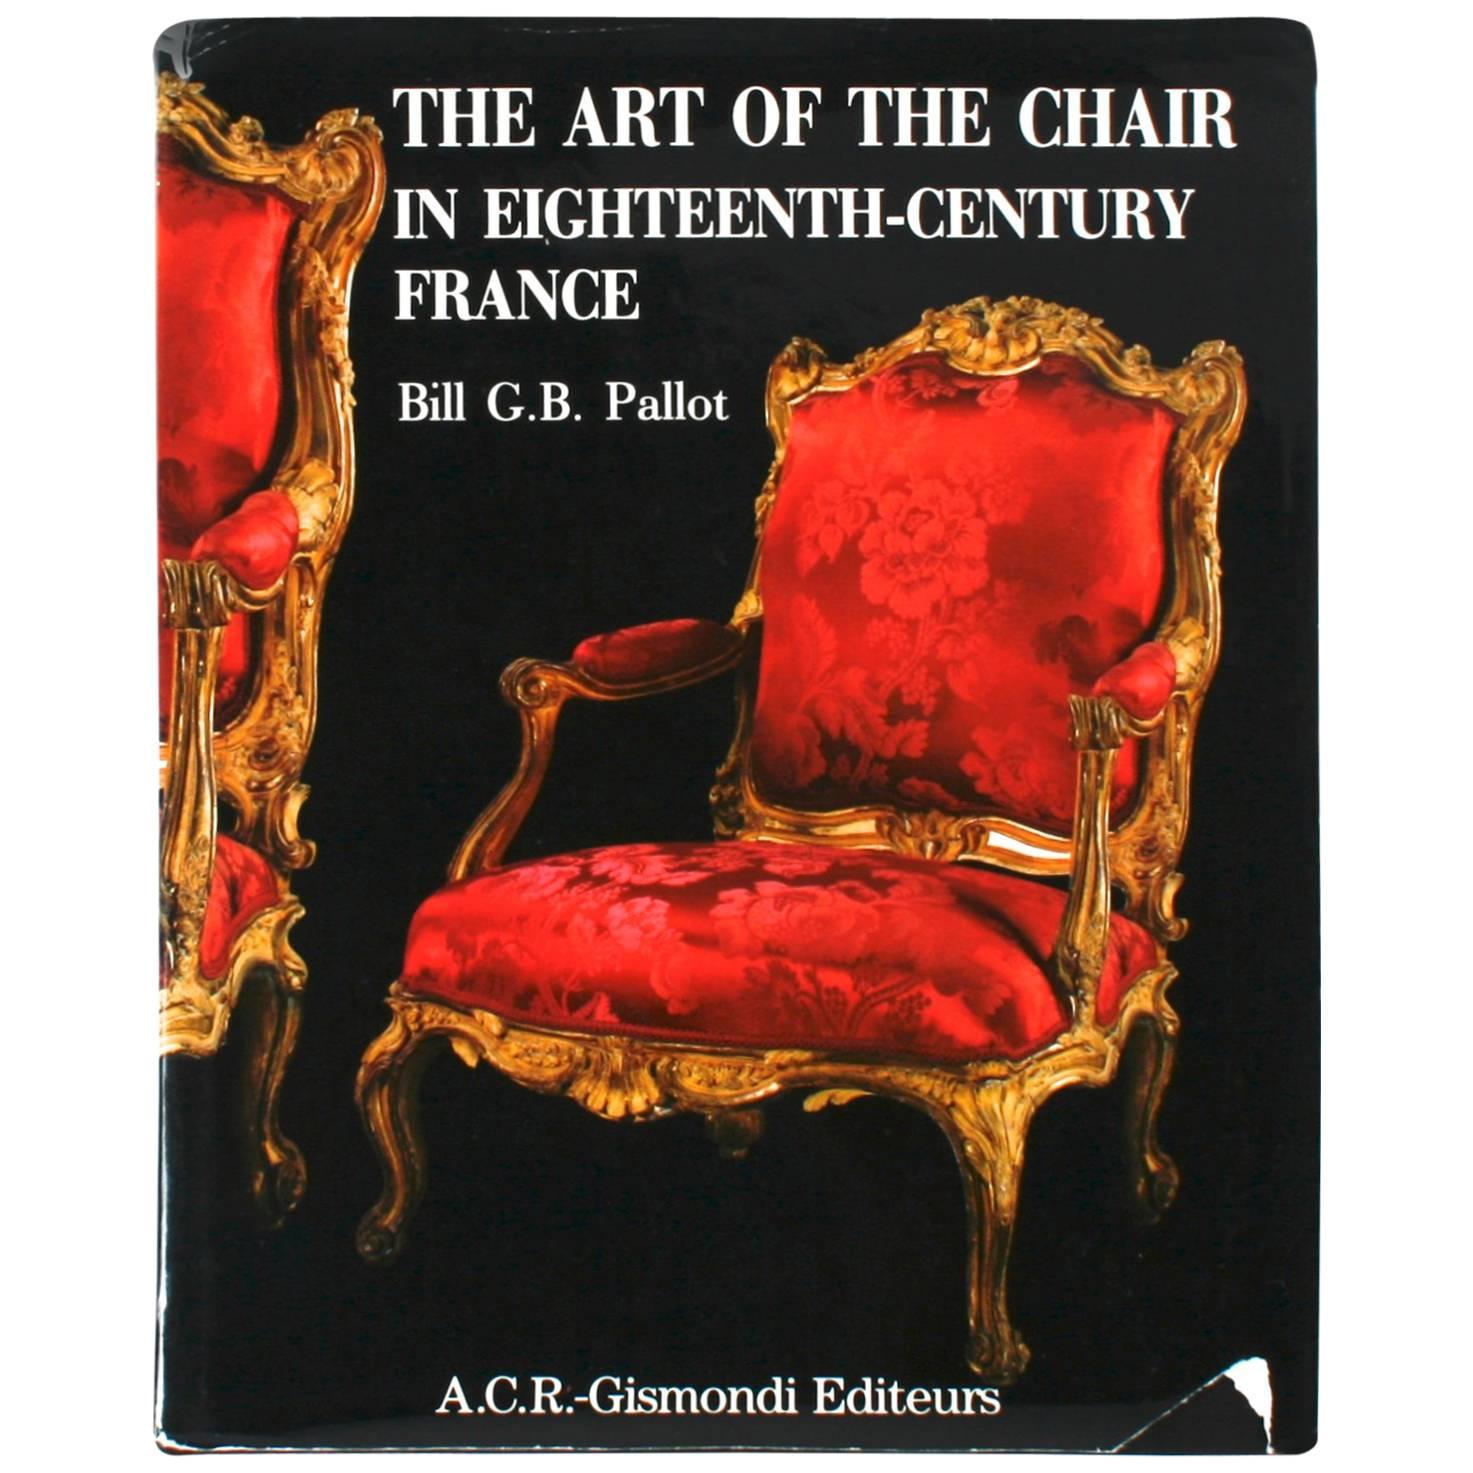 The Art of The Chair in Eighteenth-Century France, by Bill G.B. Pallot, 1st Ed